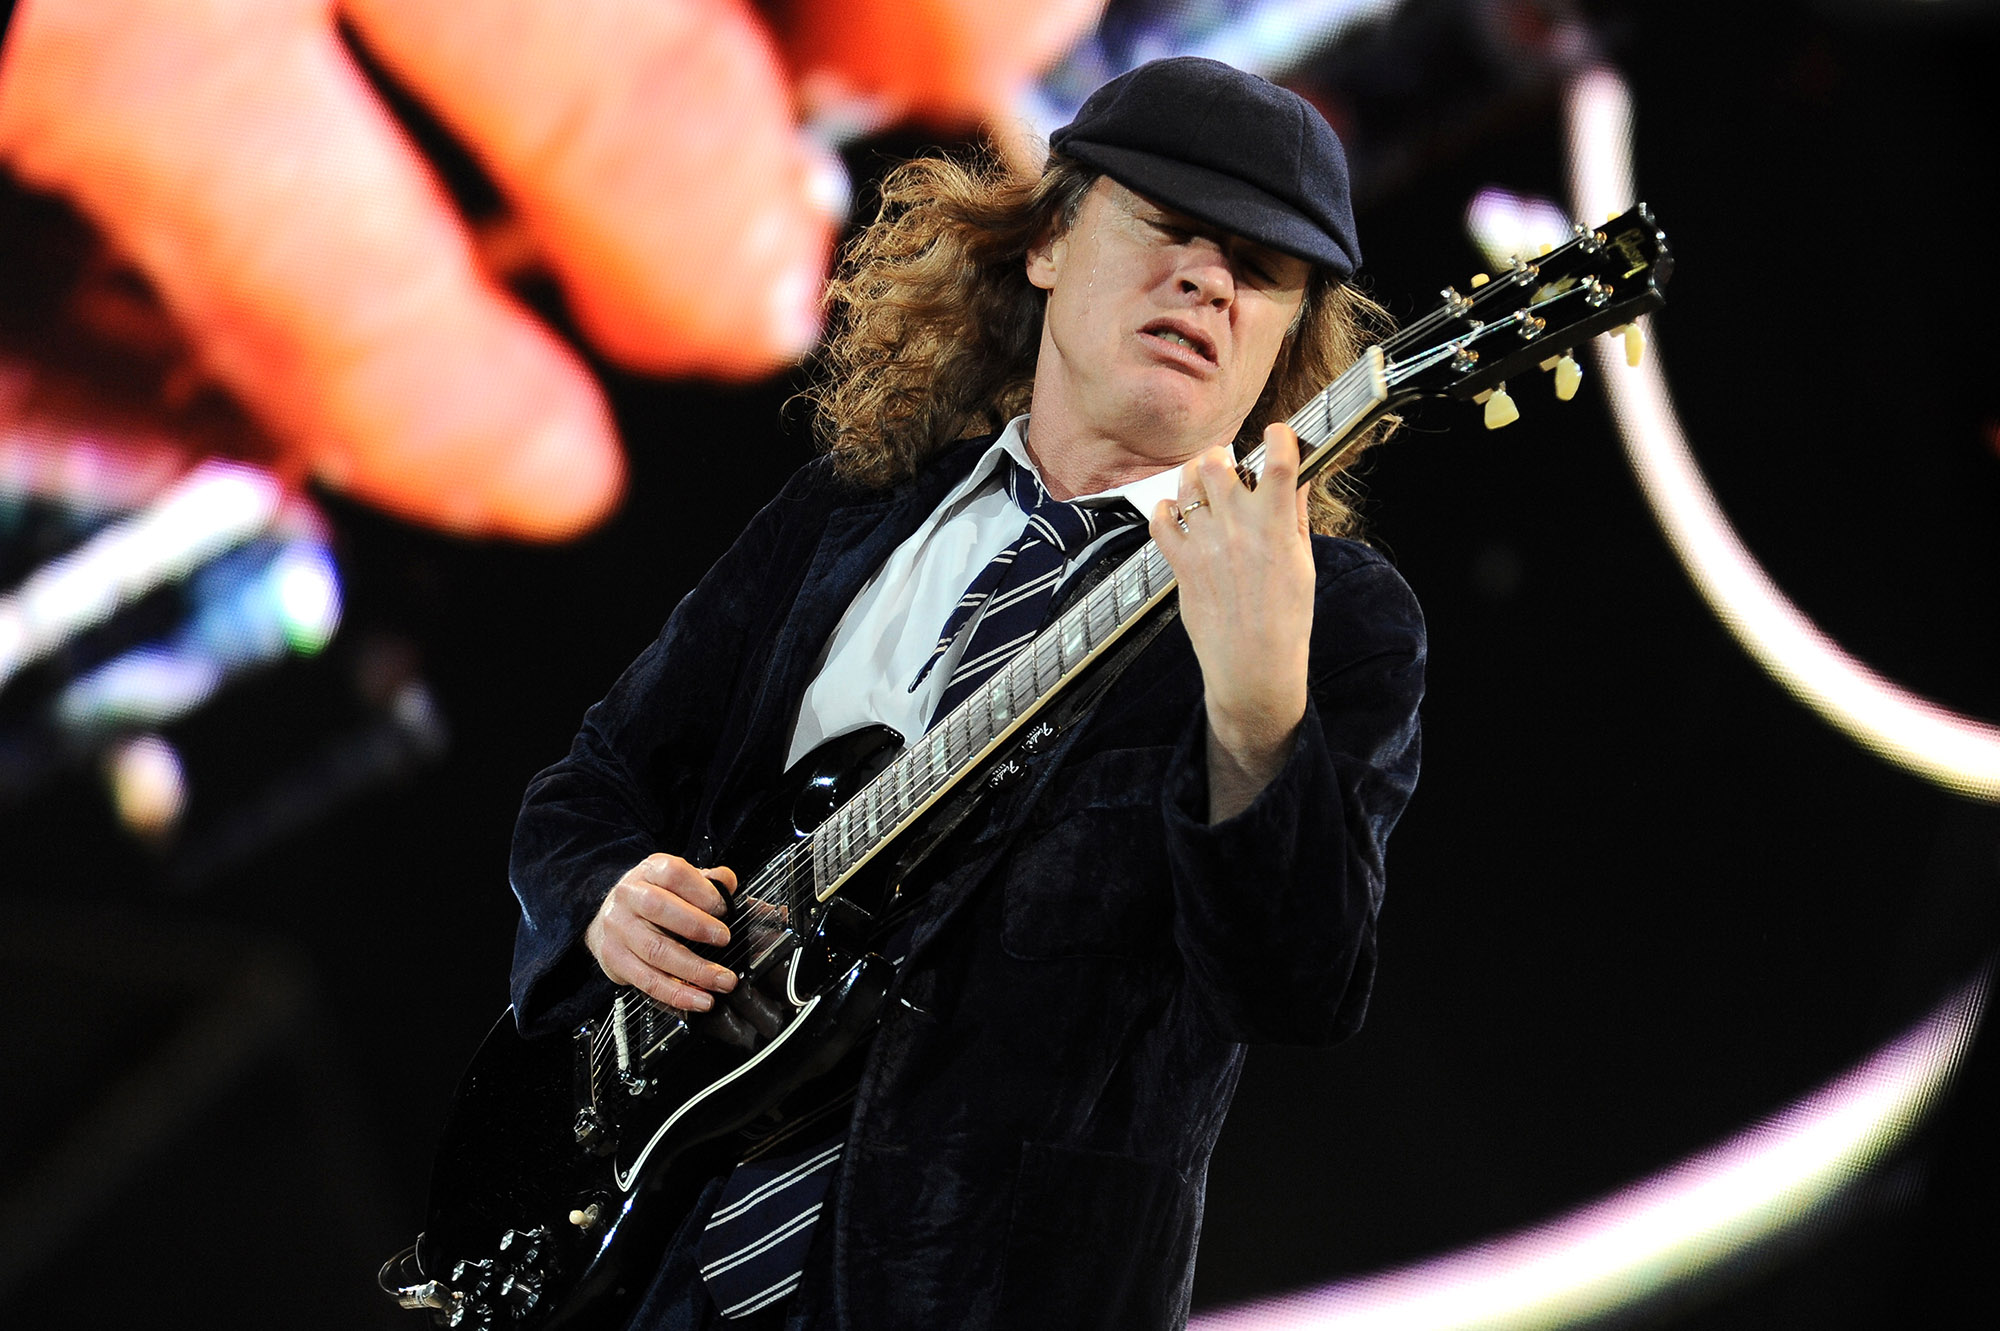 Udine Italy 05/19/2010 : Live concert of ACDC at the Stadio Friuli,Angus Young during the concert